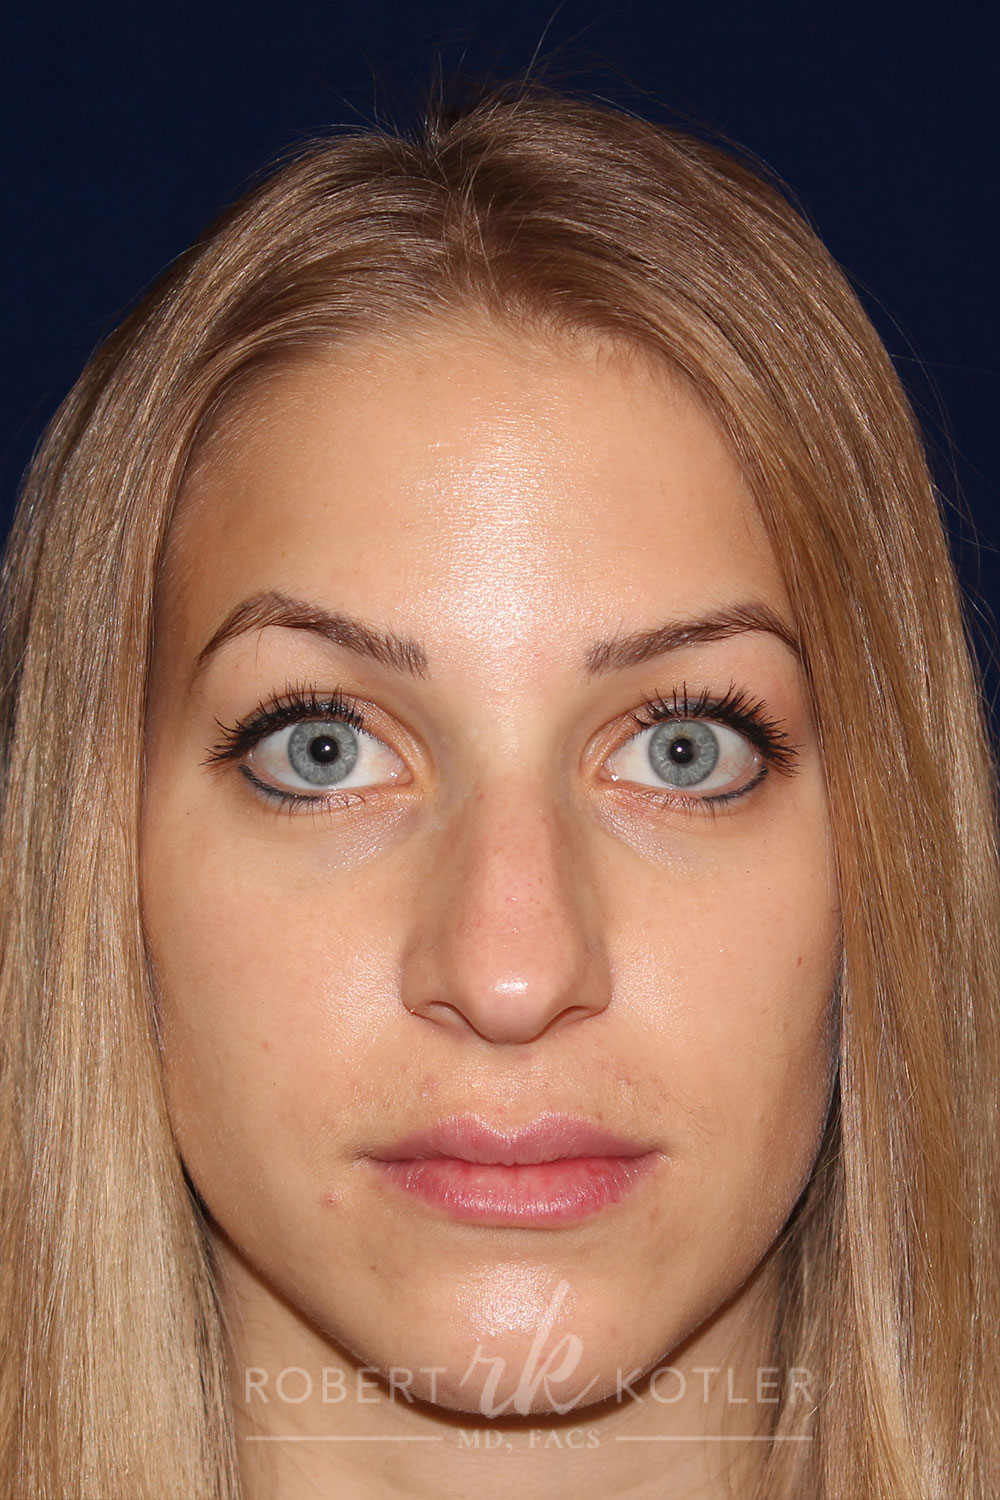 Rhinoplasty -Front Face View - Before Pic - Narrowing of the nose and bridge - Nose tip refinement - Tip elevation - Best Rhinoplasty Beverly Hills